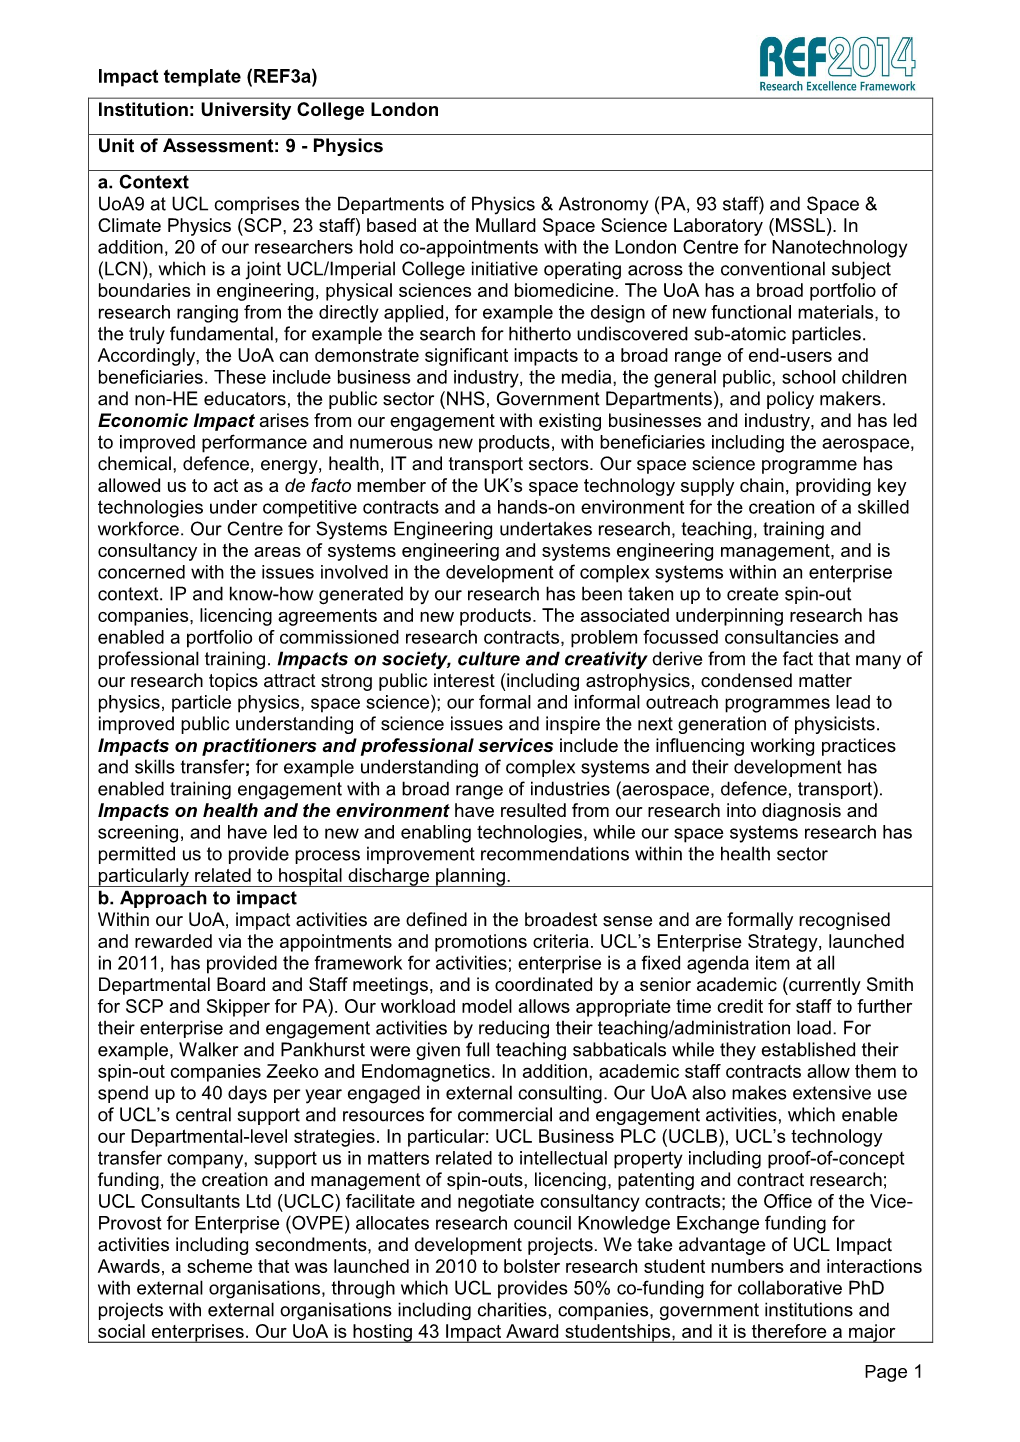 Impact Template (Ref3a) Page 1 Institution